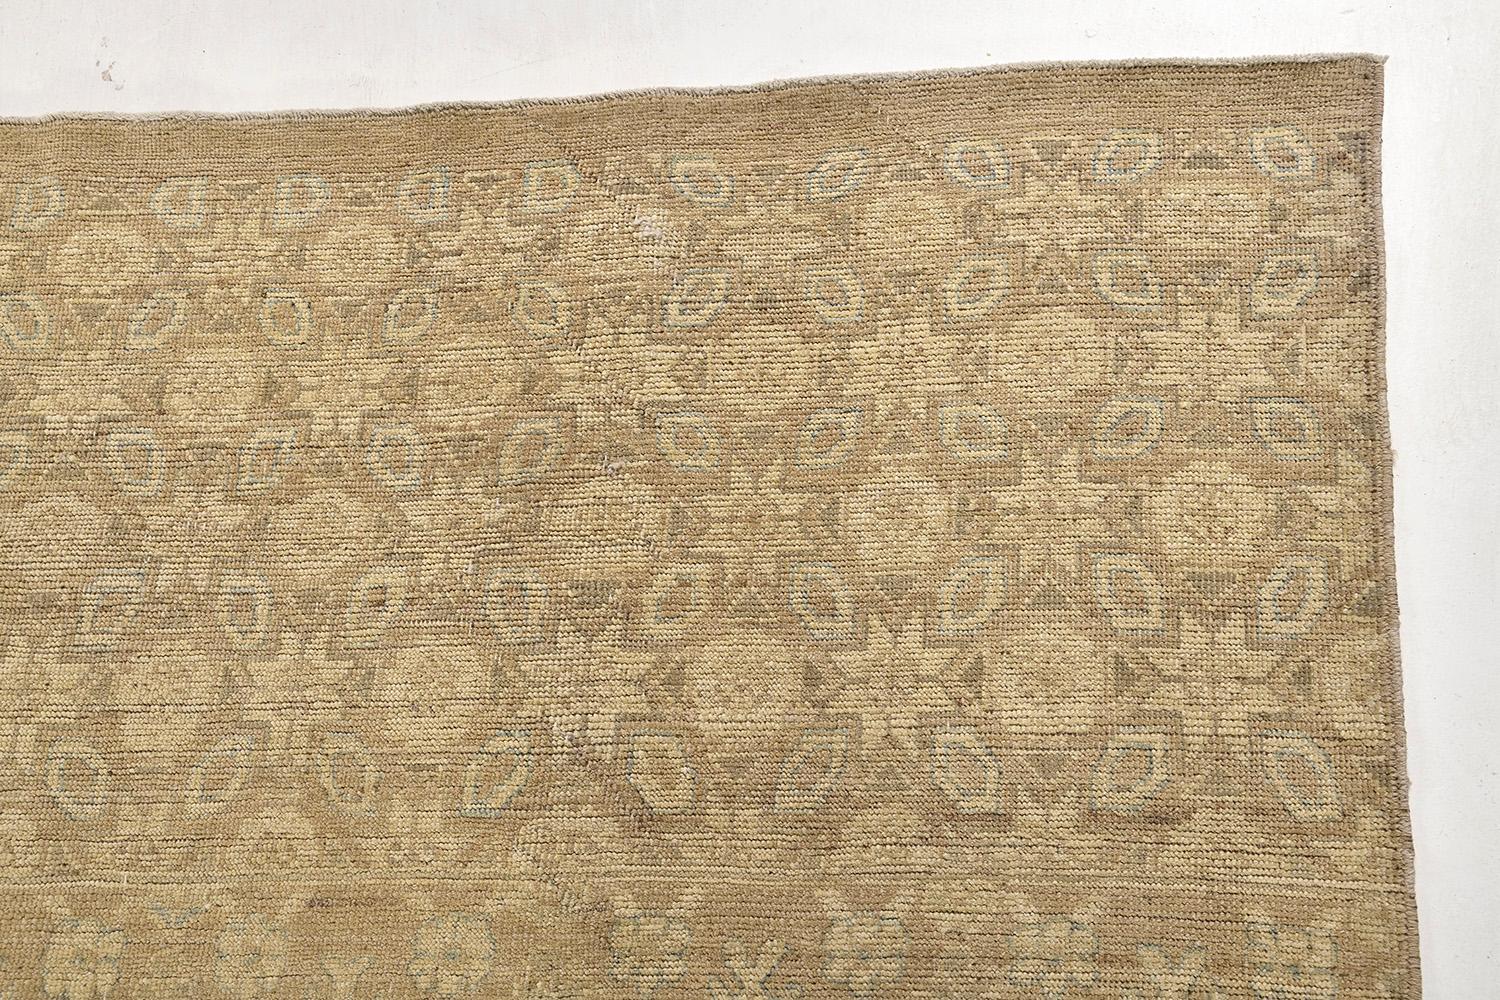 This Shawl design rug is pile-woven wool that features an elegant floral pattern, geometric motifs, and grandiose embellishments, over gold and sage gray outlines. An intricate pattern is well-coordinated with blooming borders. It is formed